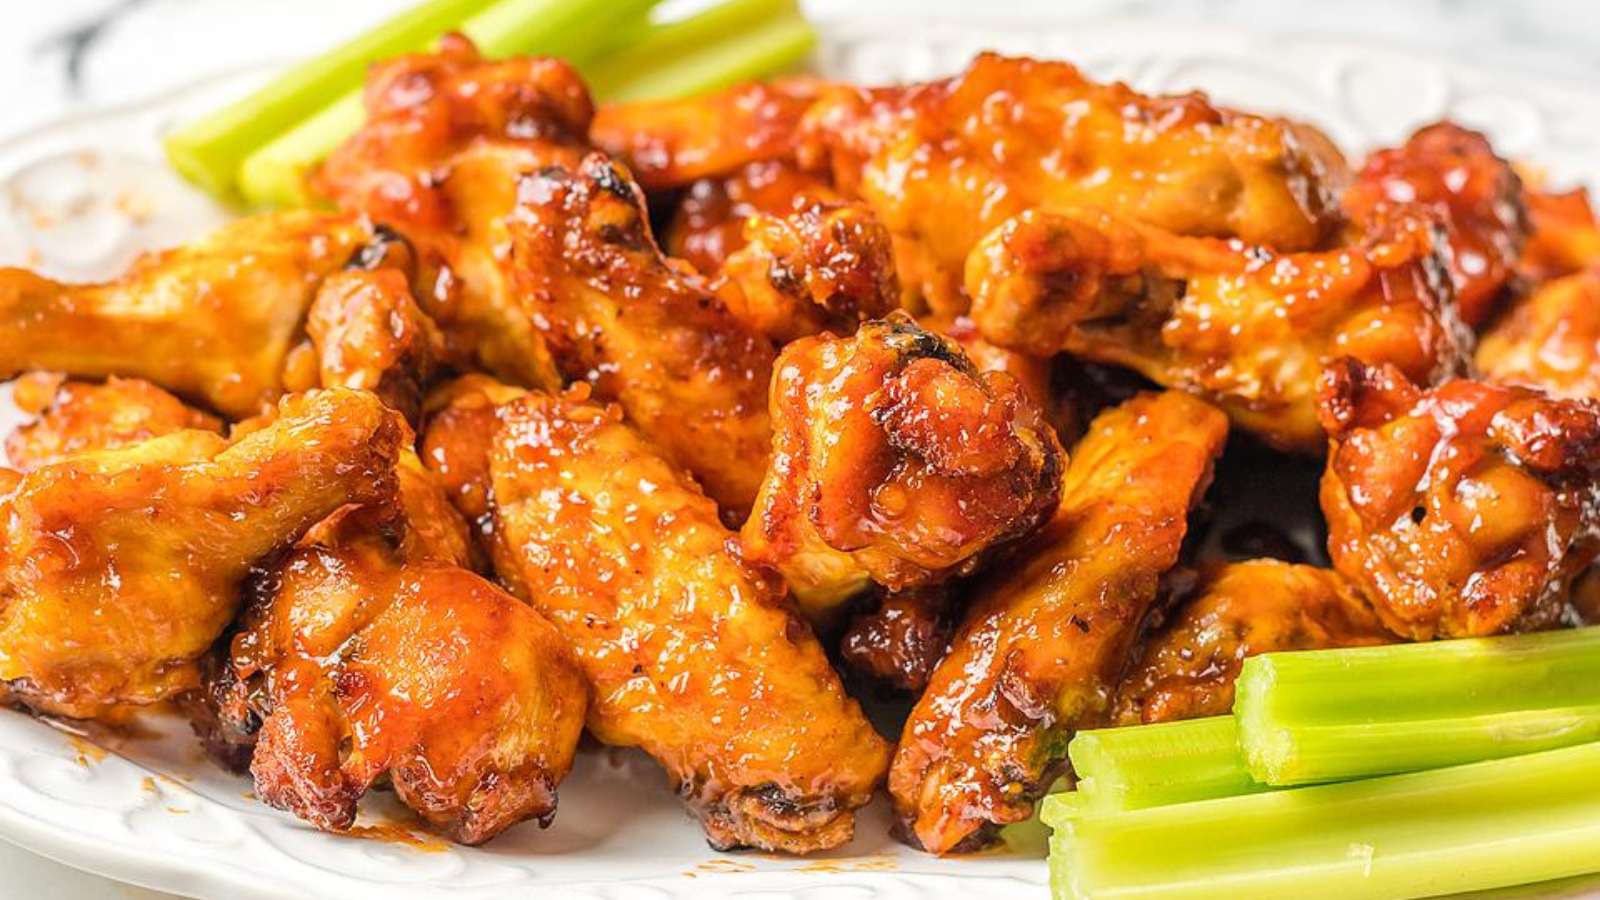 Chicken wings on a plate with celery and celery sticks.